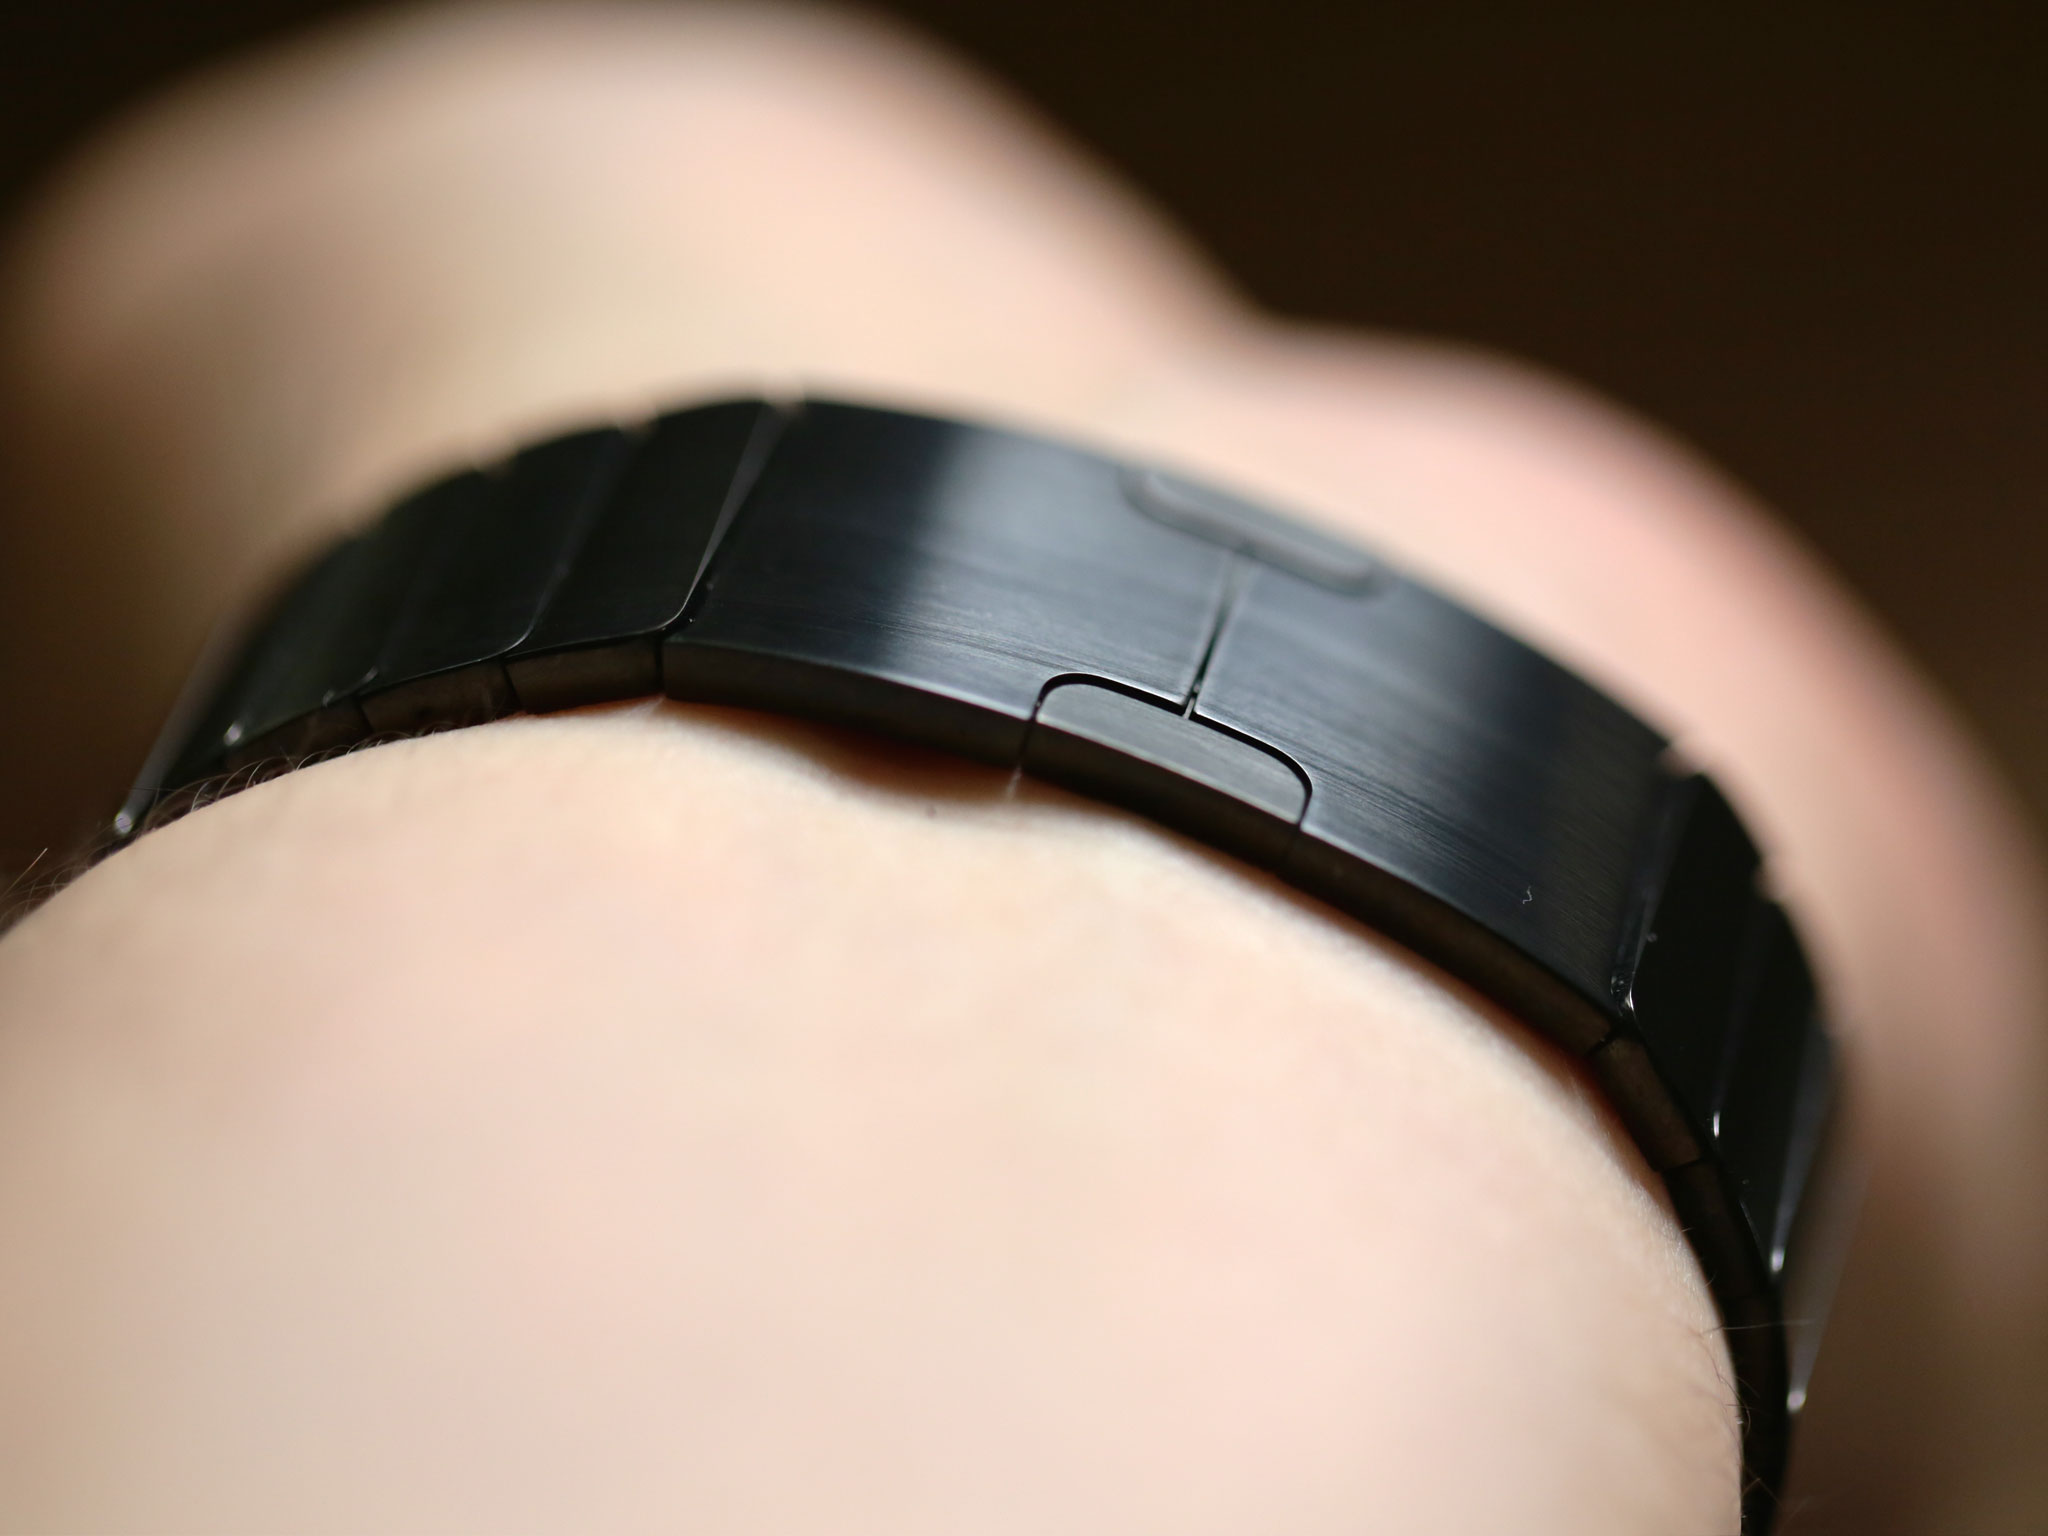 Link Bracelet band for Apple Watch review